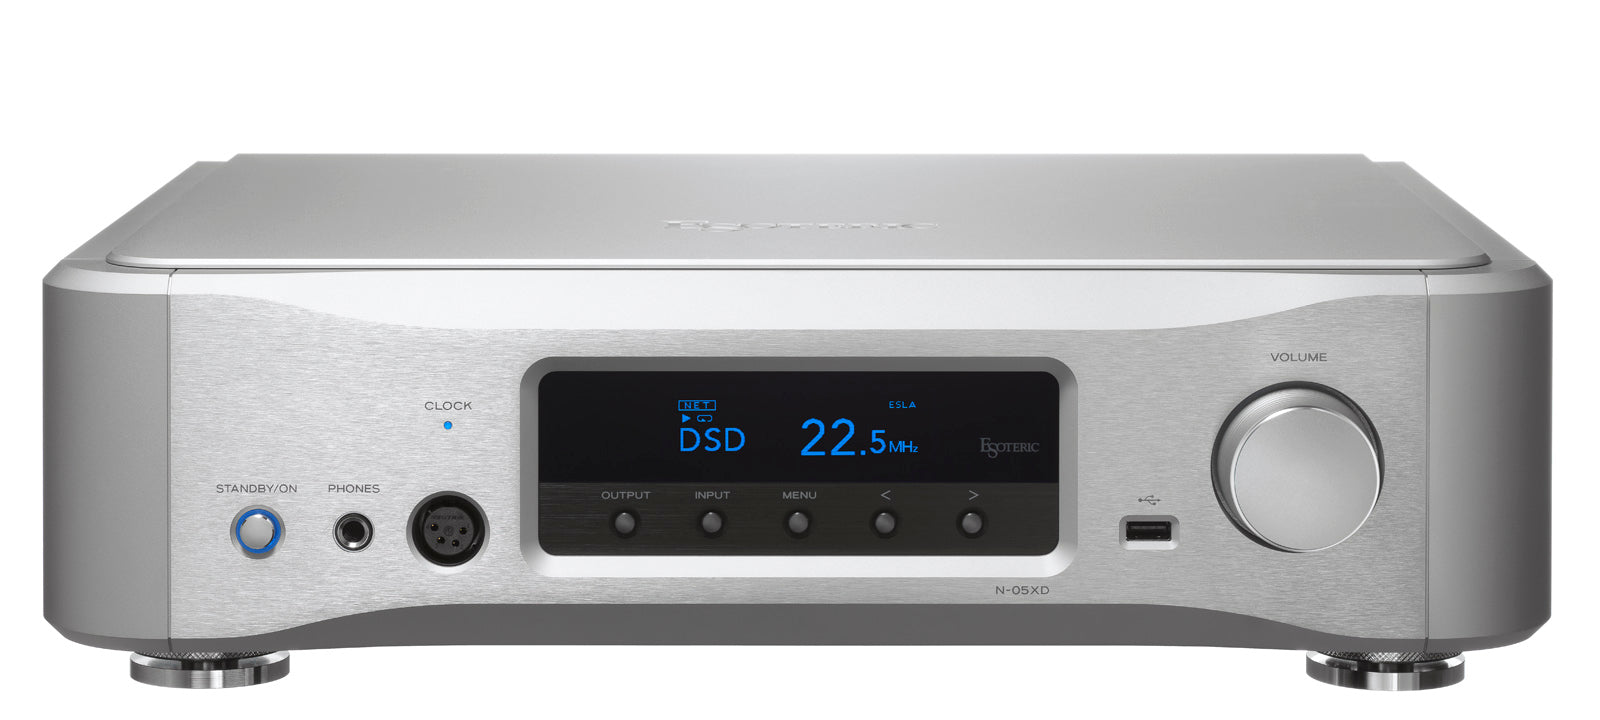 The N-05XD represents a new frontier in network DAC/preamps. An integration of essences only Esoteric can achieve. As Esoteric’s first-ever network DAC/preamp, the N-05XD was designed to deliver superior sound  from the smallest system configurations combining your favorite  amplifier, speakers, and headphones. Integrating fully balanced circuitry.